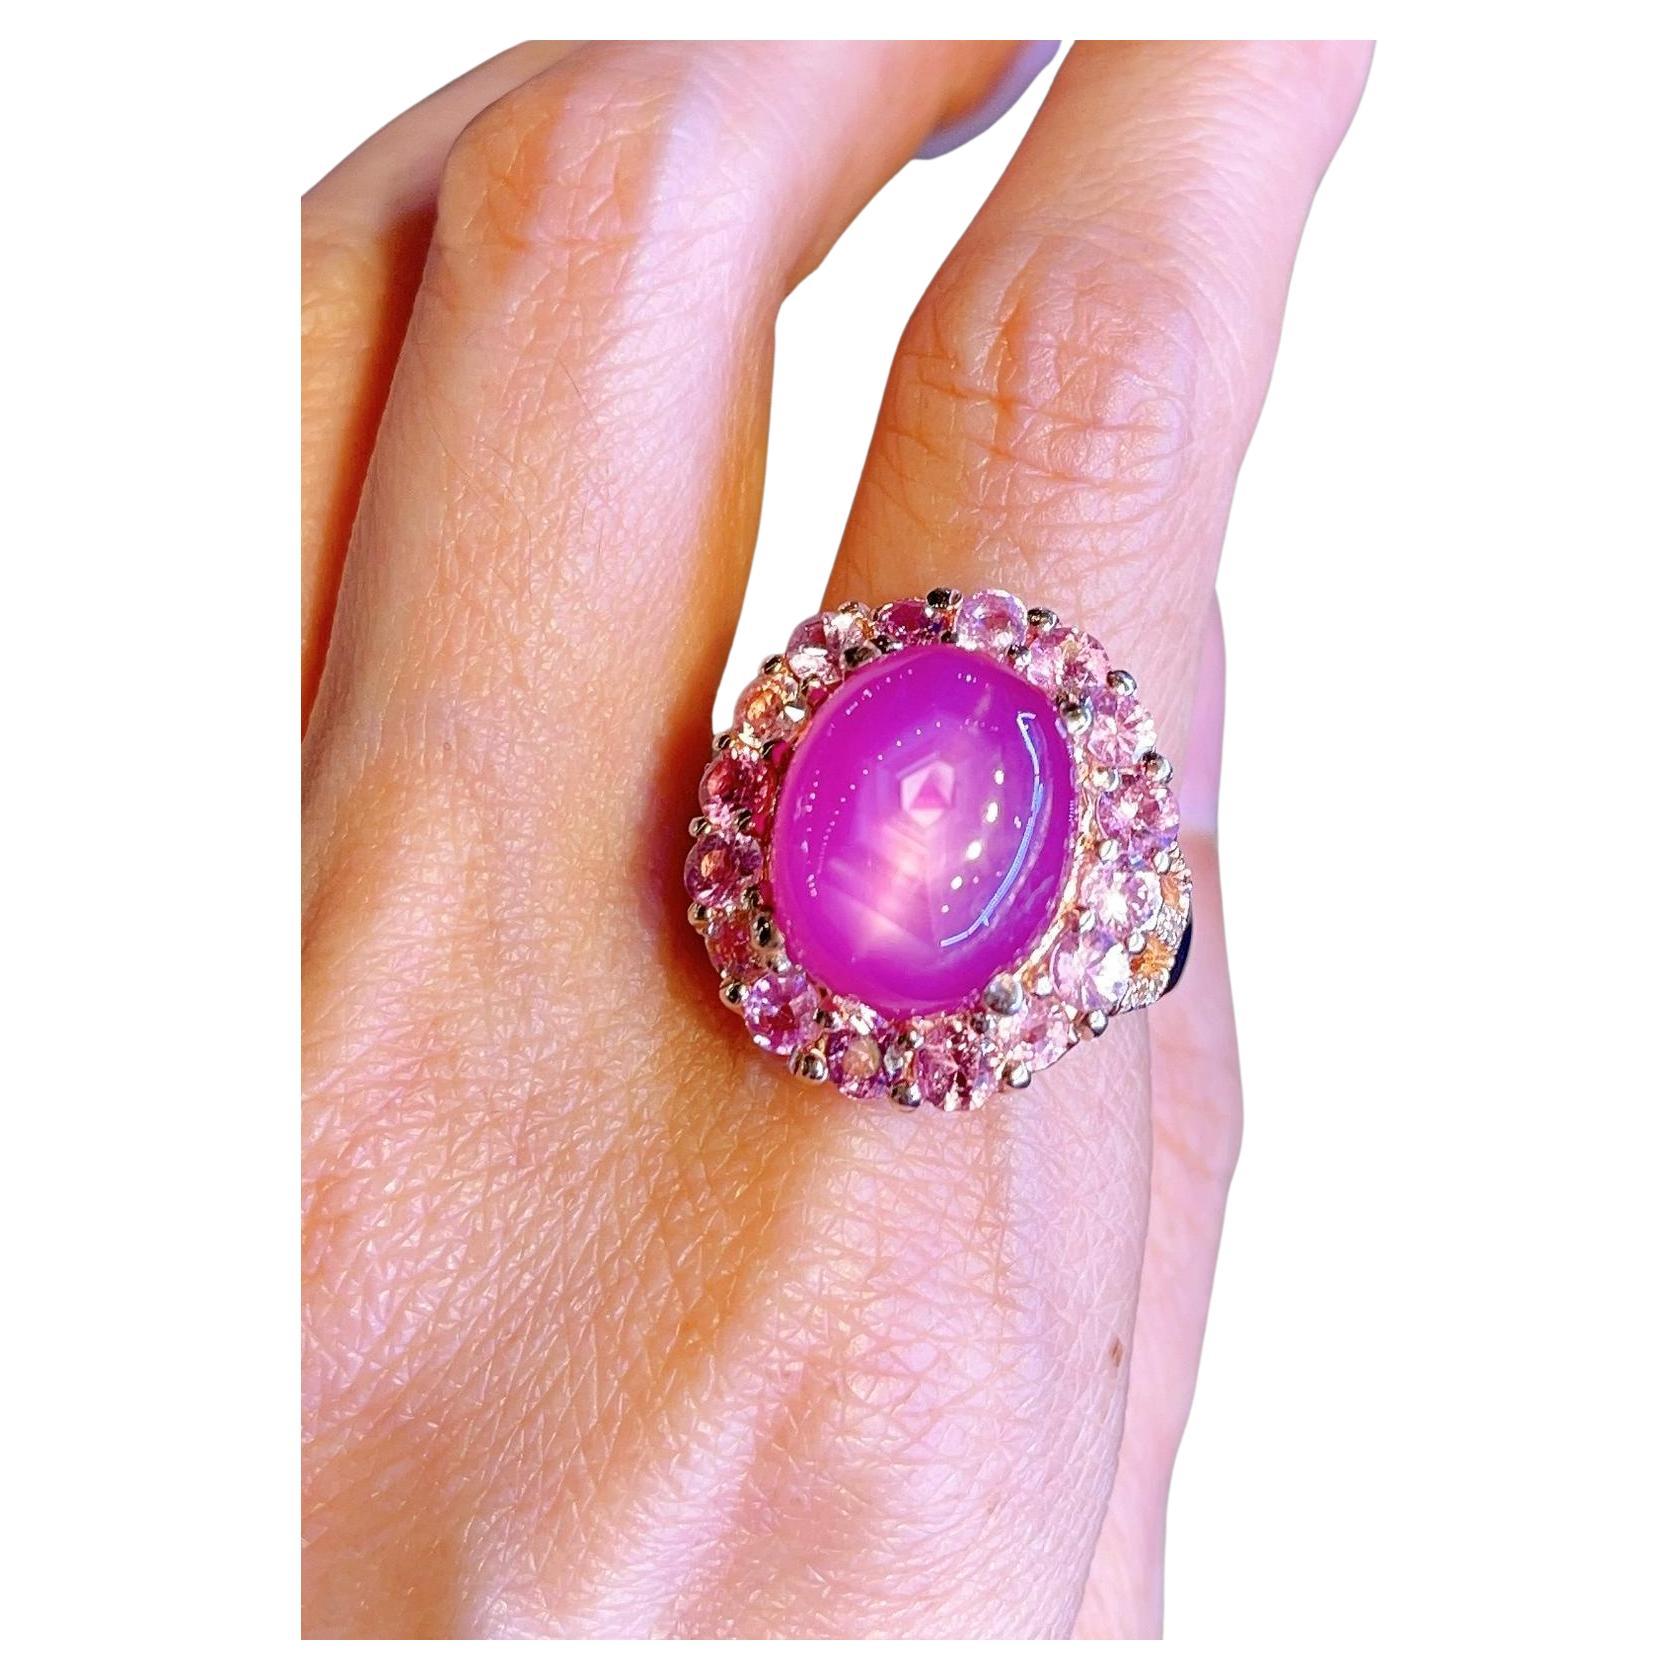 Bochic “Capri” Star Ruby Ring with Pink Sapphires set in 22K Gold & Silver